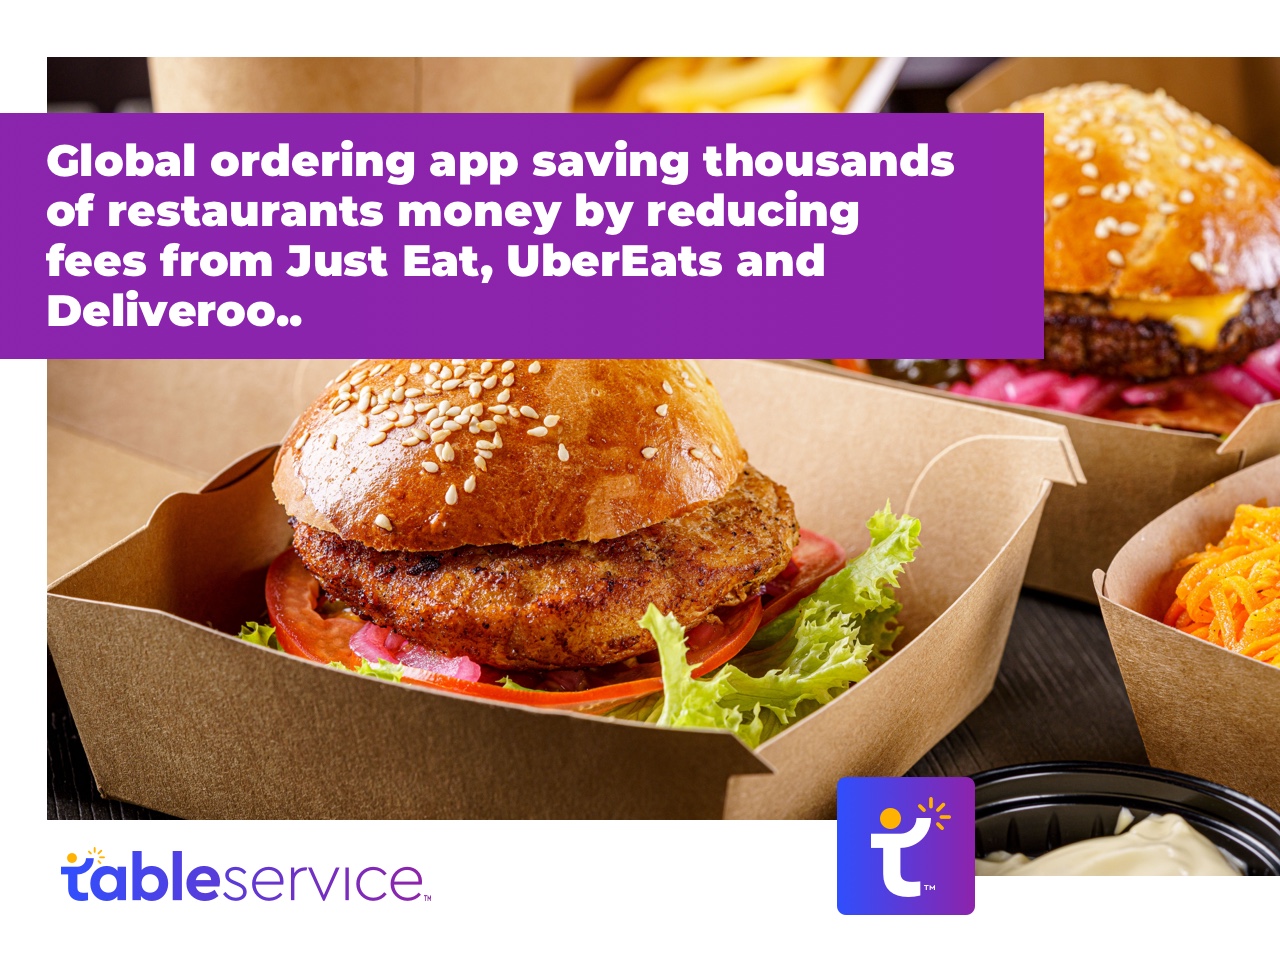 Table Service App: Global ordering app saving thousands of restaurants money by reducing fees from Just Eat, UberEats and Deliveroo